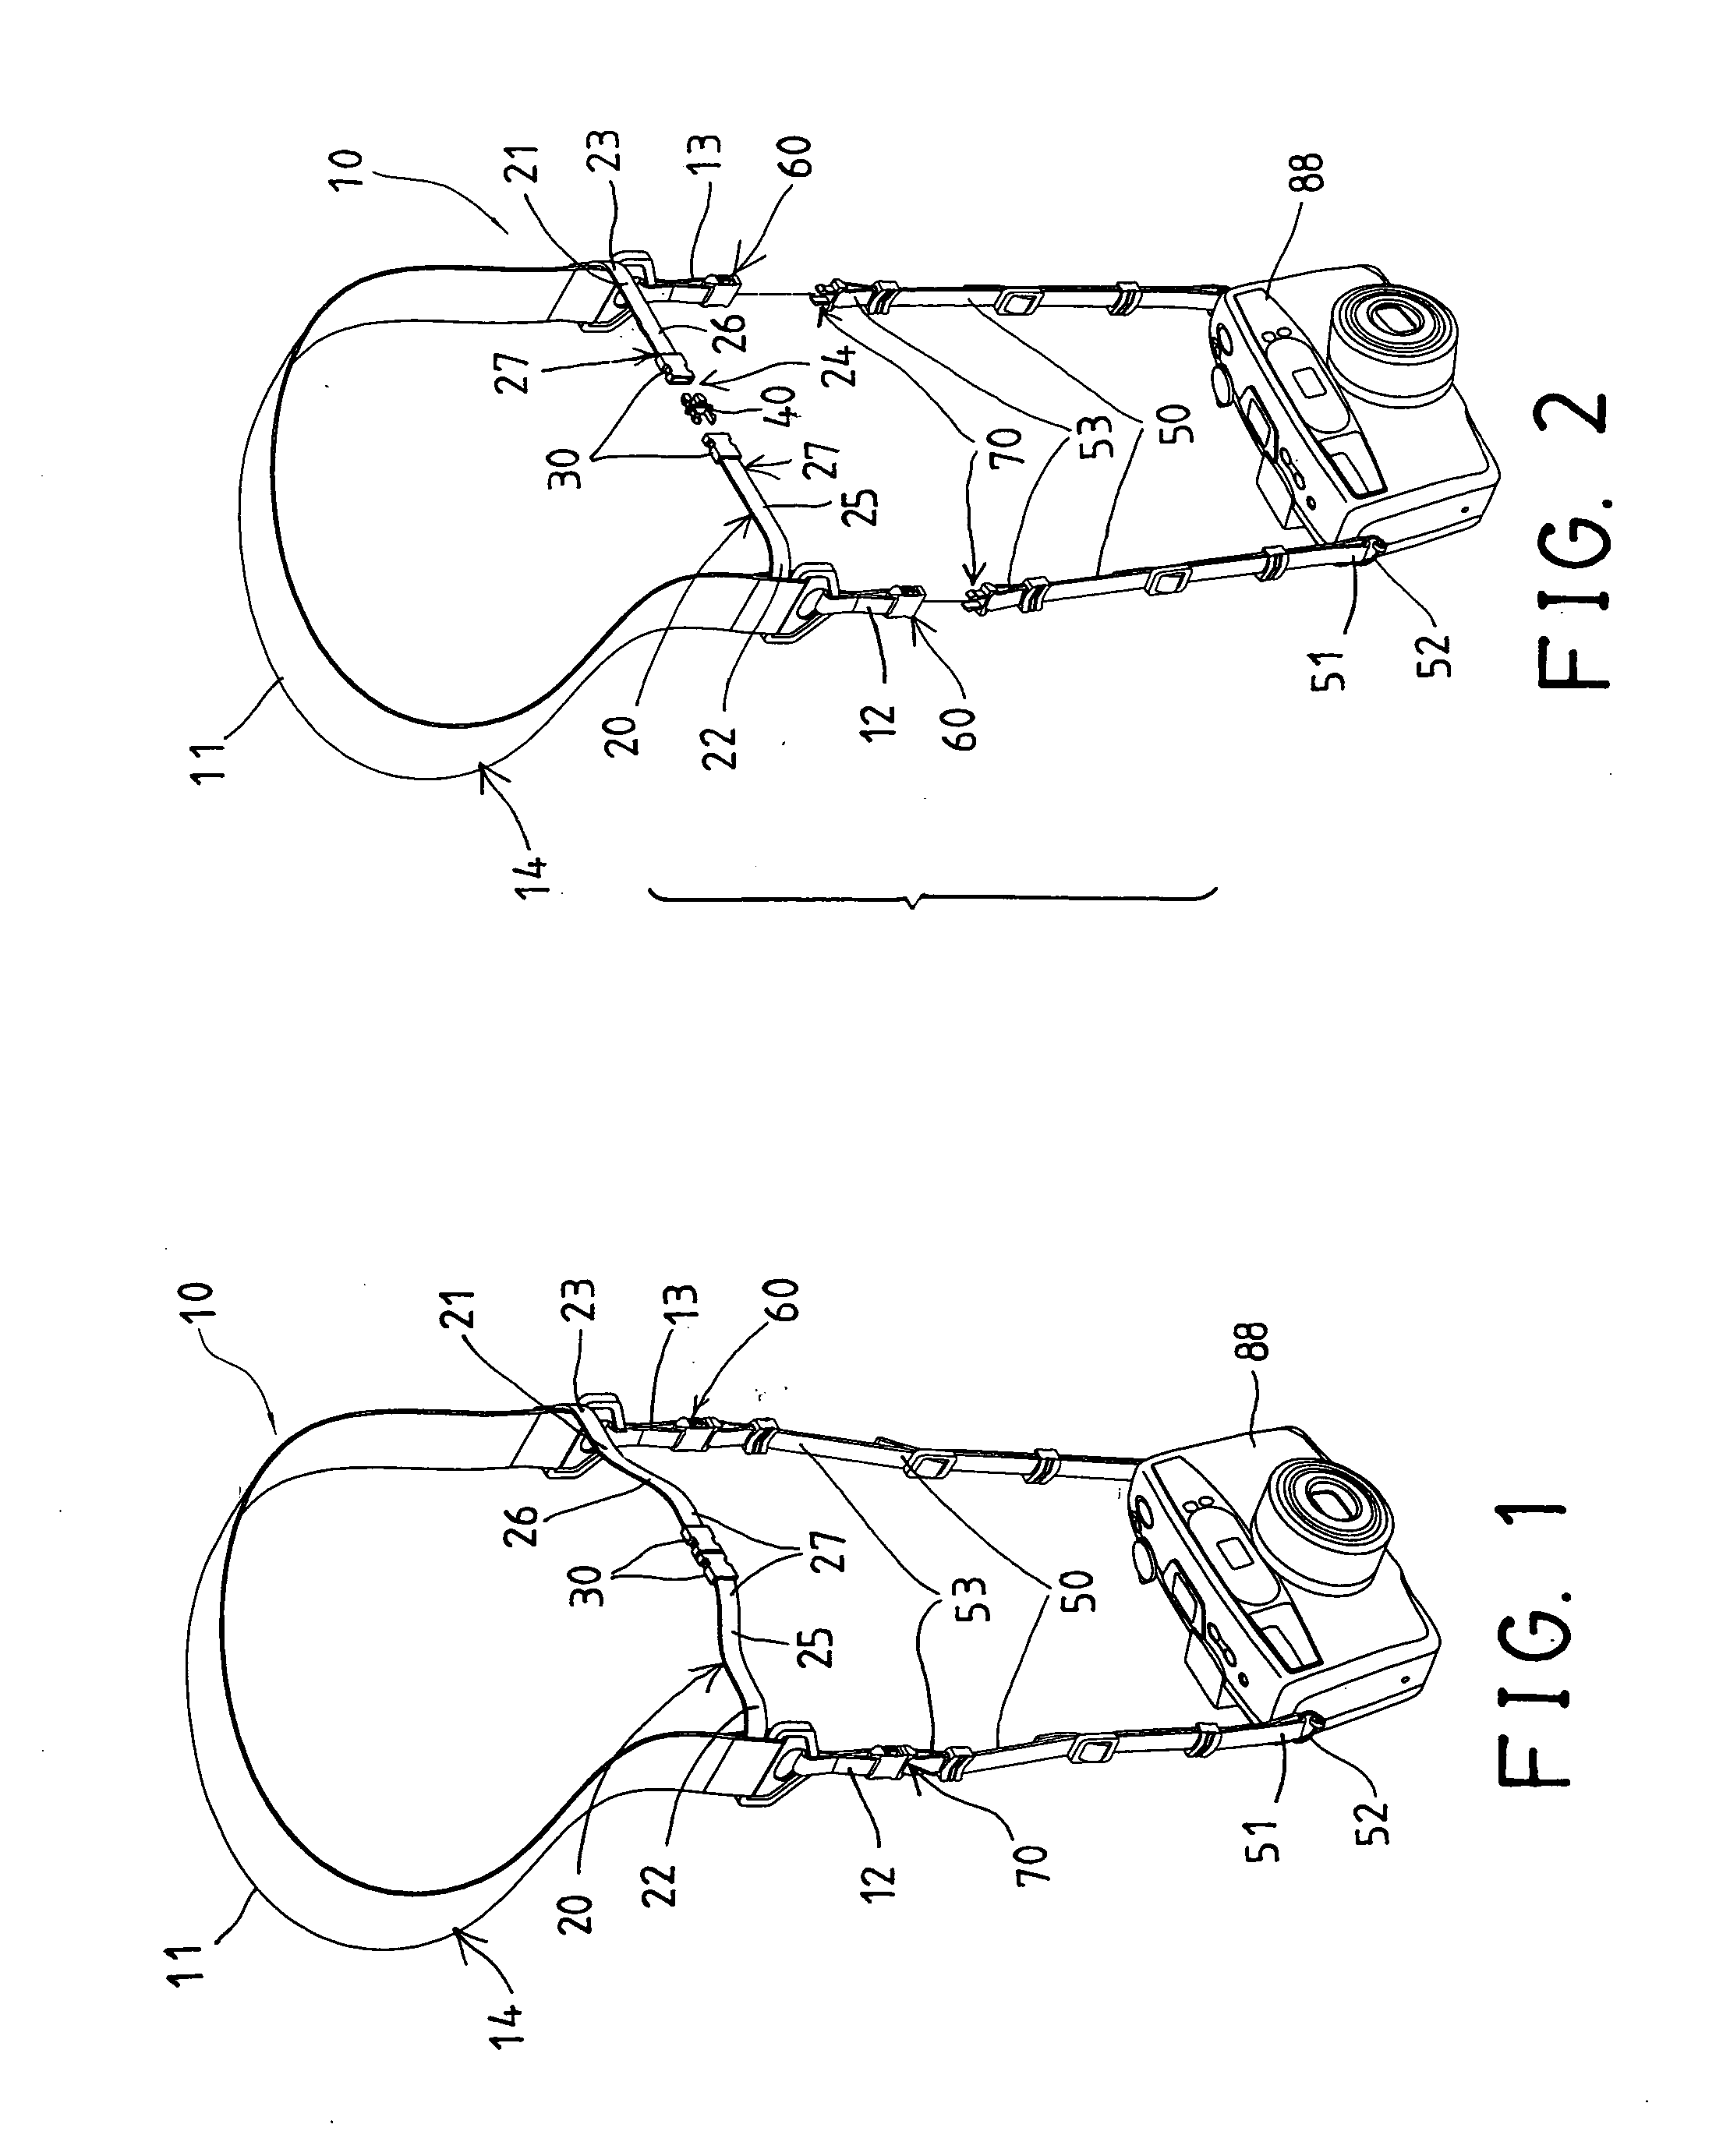 Carrying strap having protective device